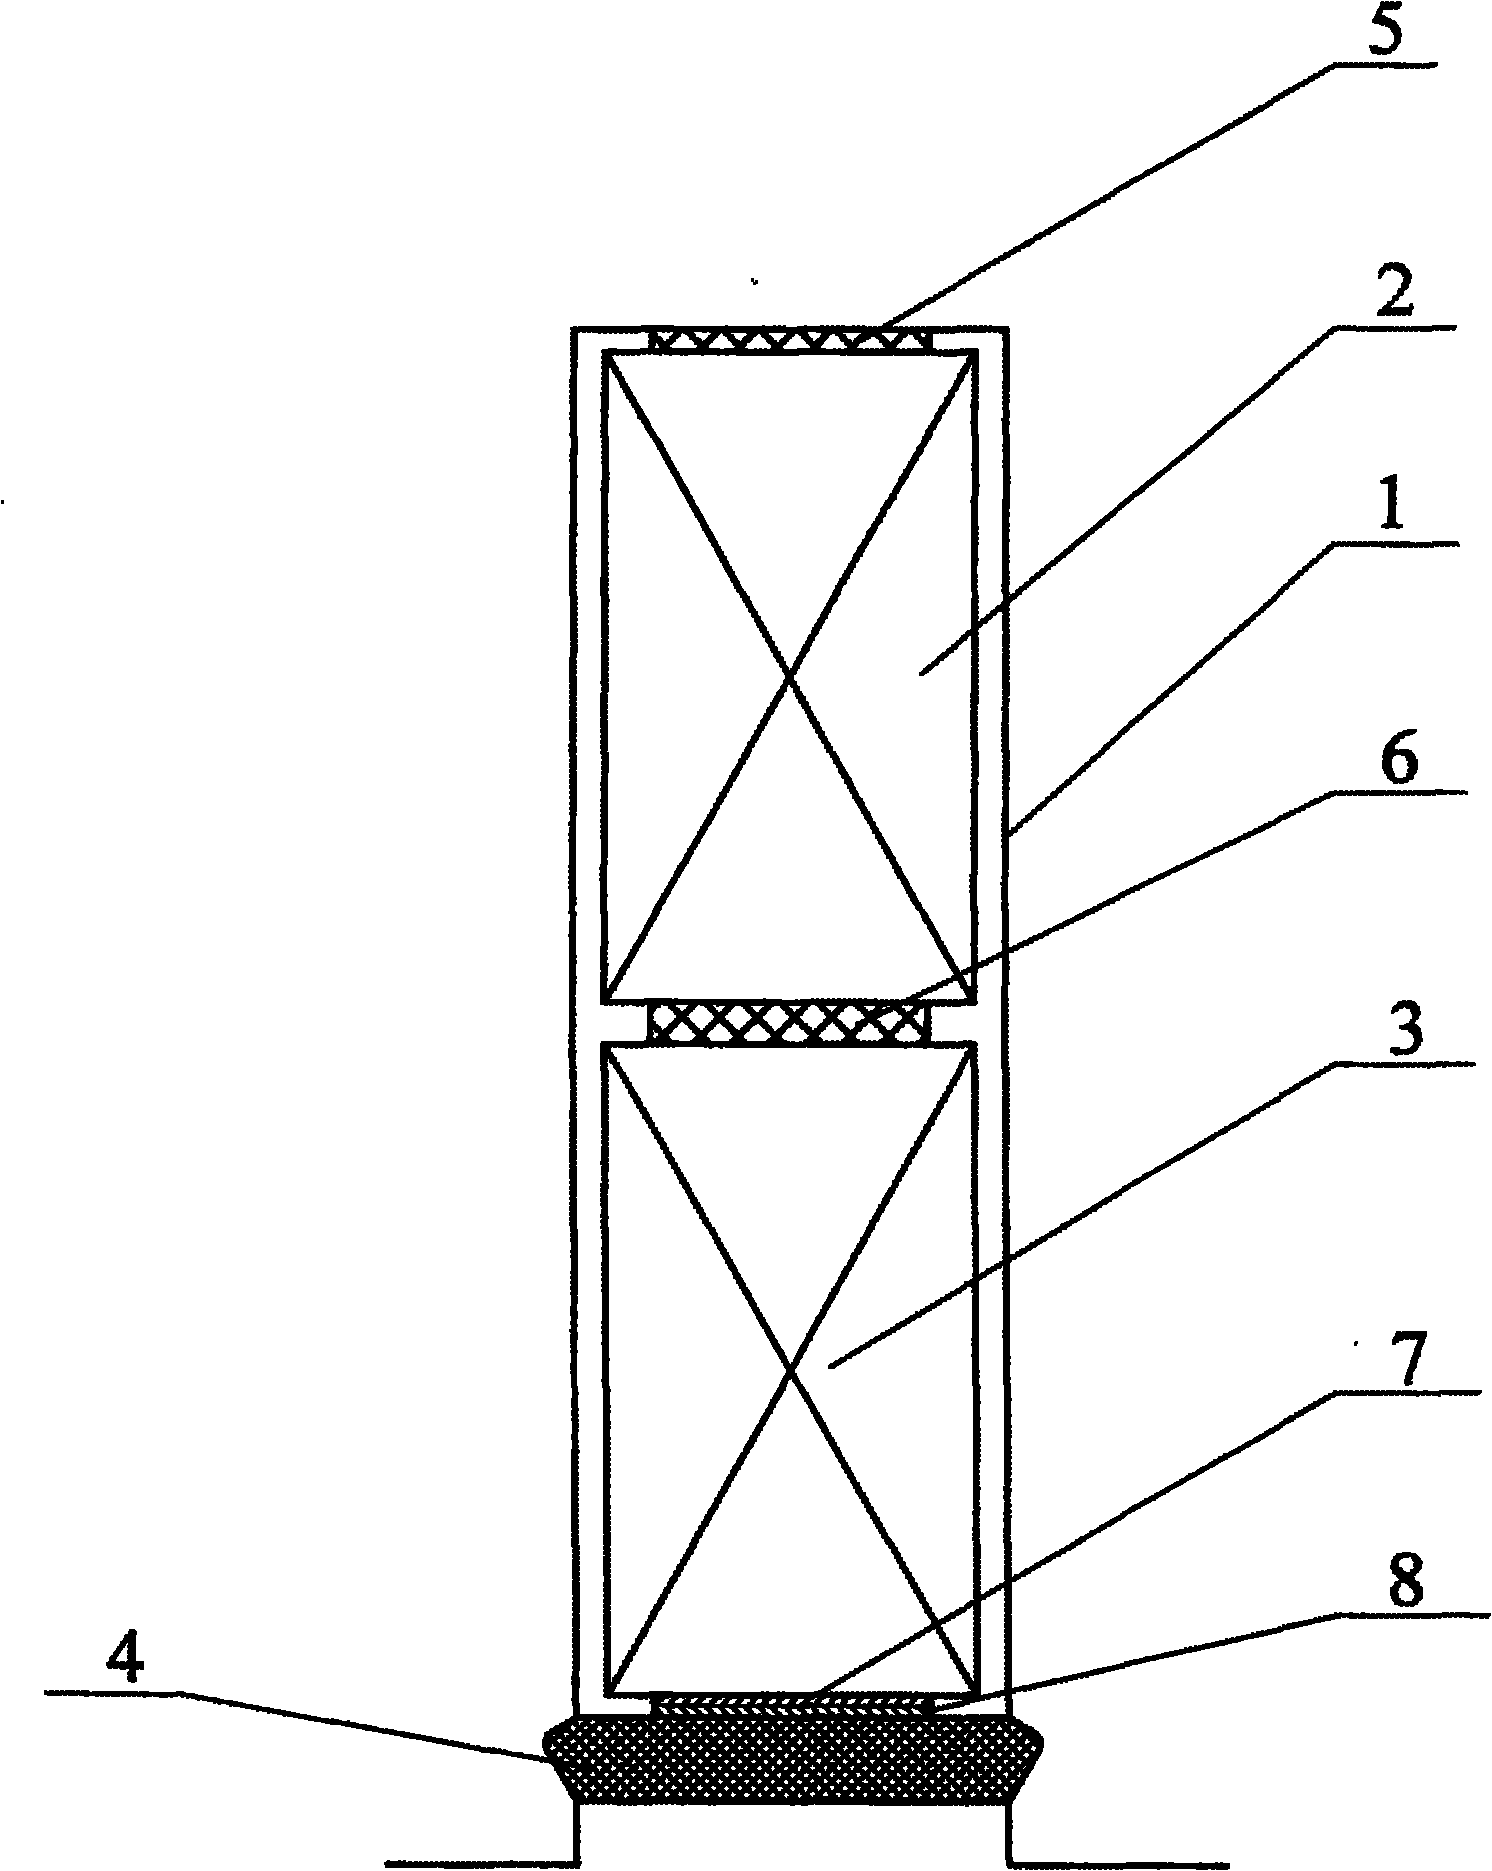 Motor stator component structure with magnetic slot wedge